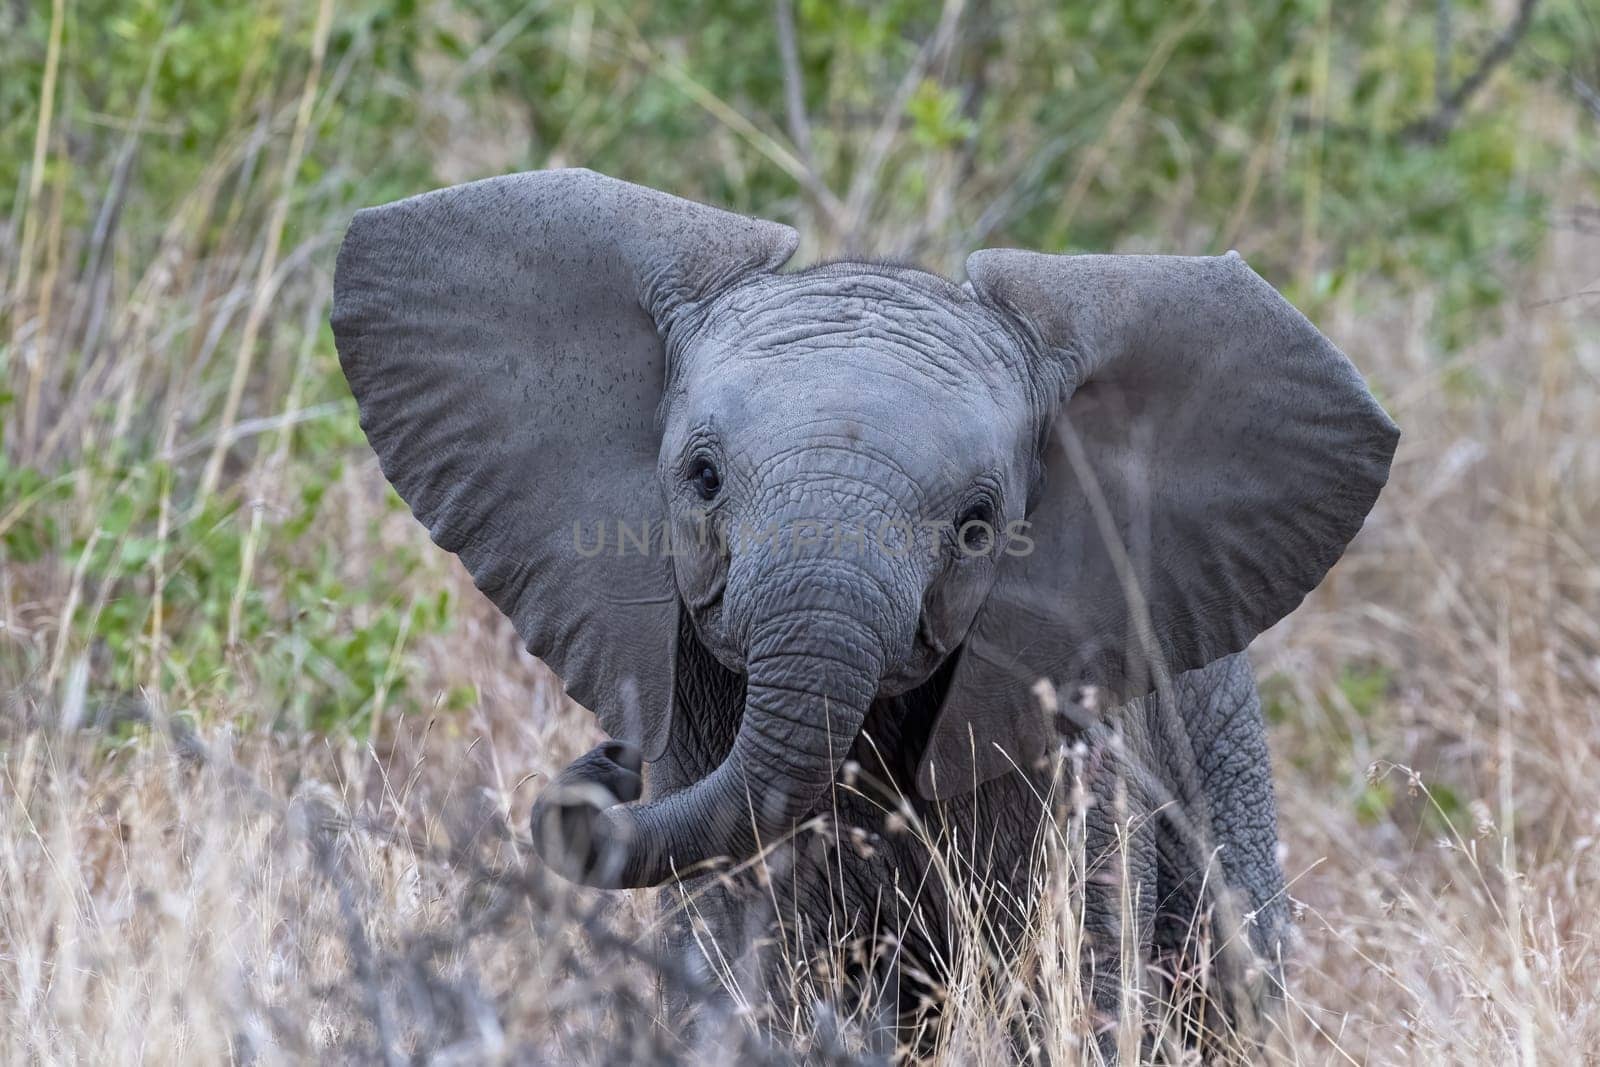 Young Baby African elephant in the Kruger National Park, South Africa by AndreaIzzotti